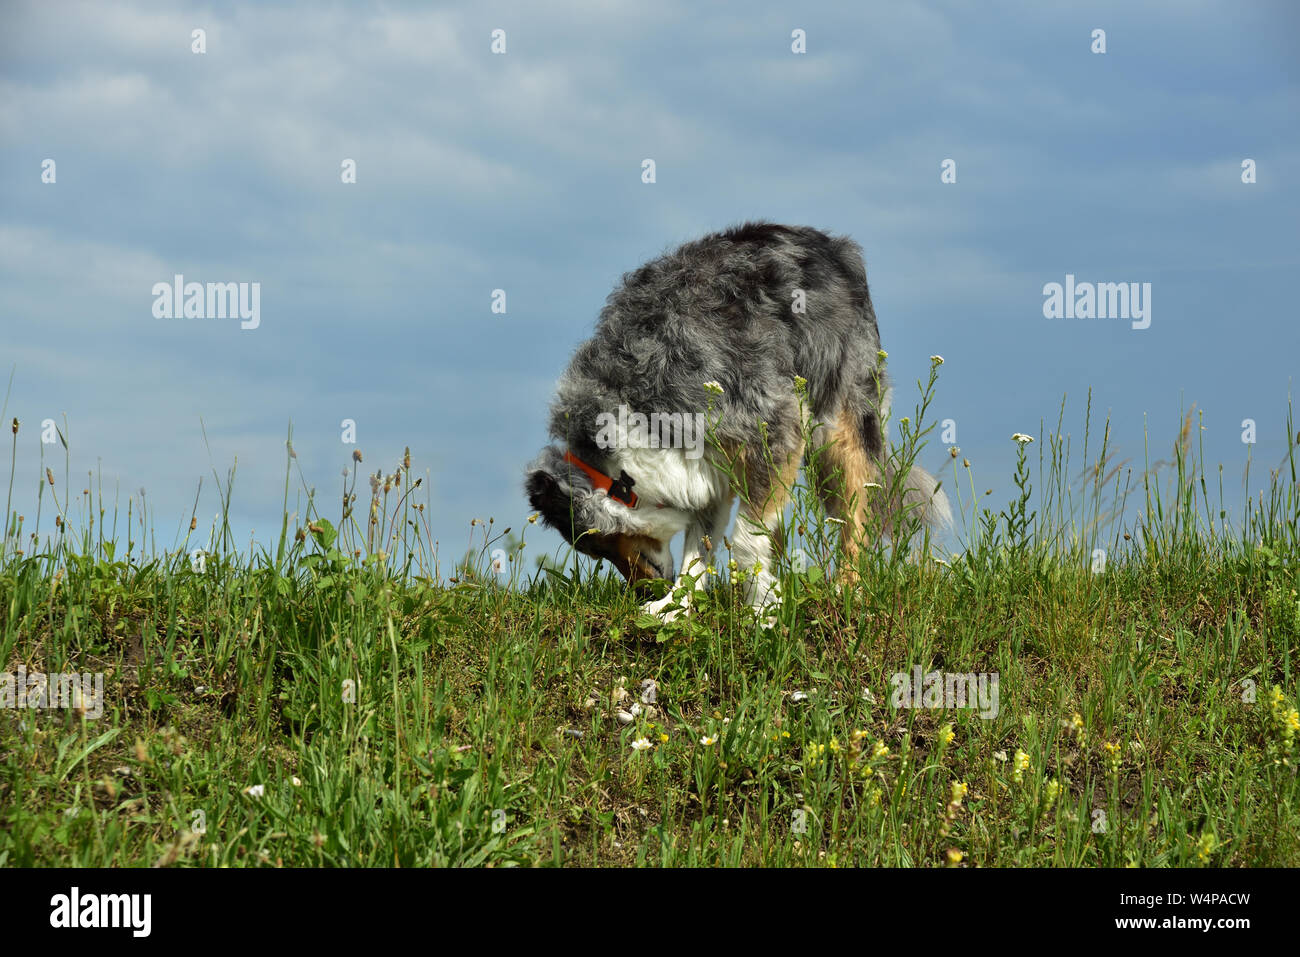 A hairy dog sniffs at a meadow in front of blue sky with clouds Stock Photo